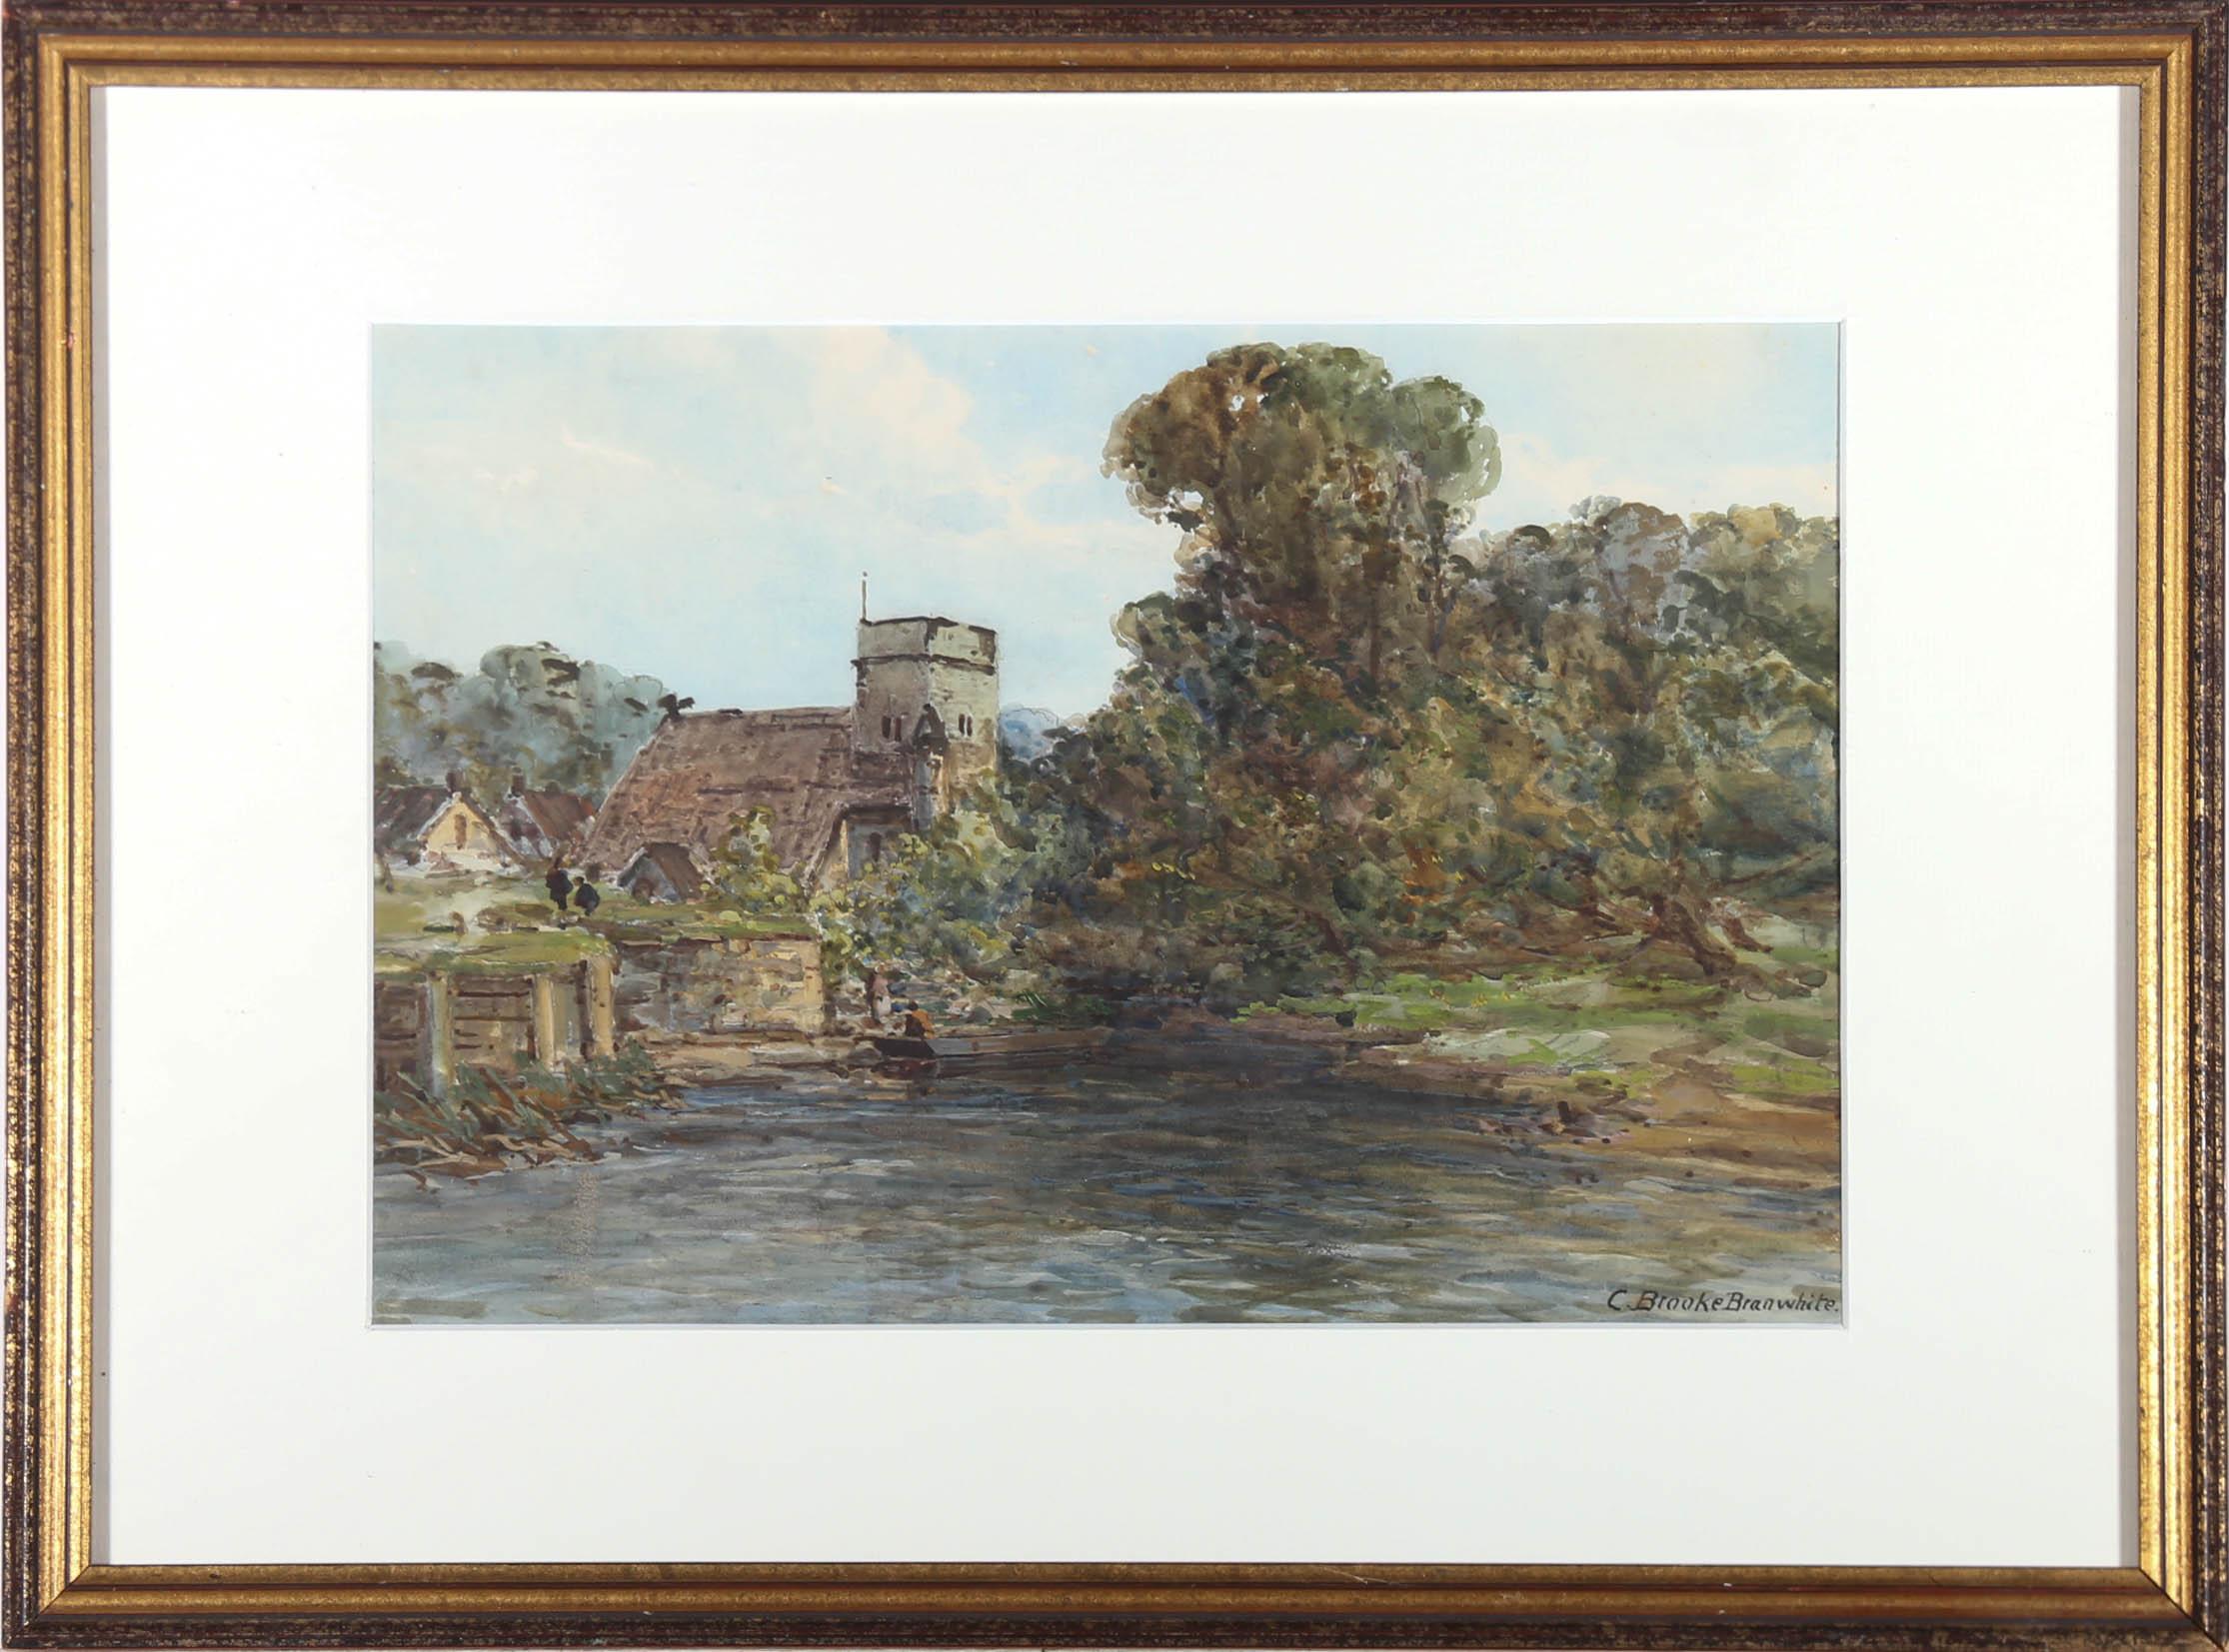 A fine landscape painting by Charles Brooke Branwhite (1851-1929), depicting a view along the River Thames towards the village of Goring, with punting boats moored along the river bank. Signed to the lower right. Elegantly presented in an attractive